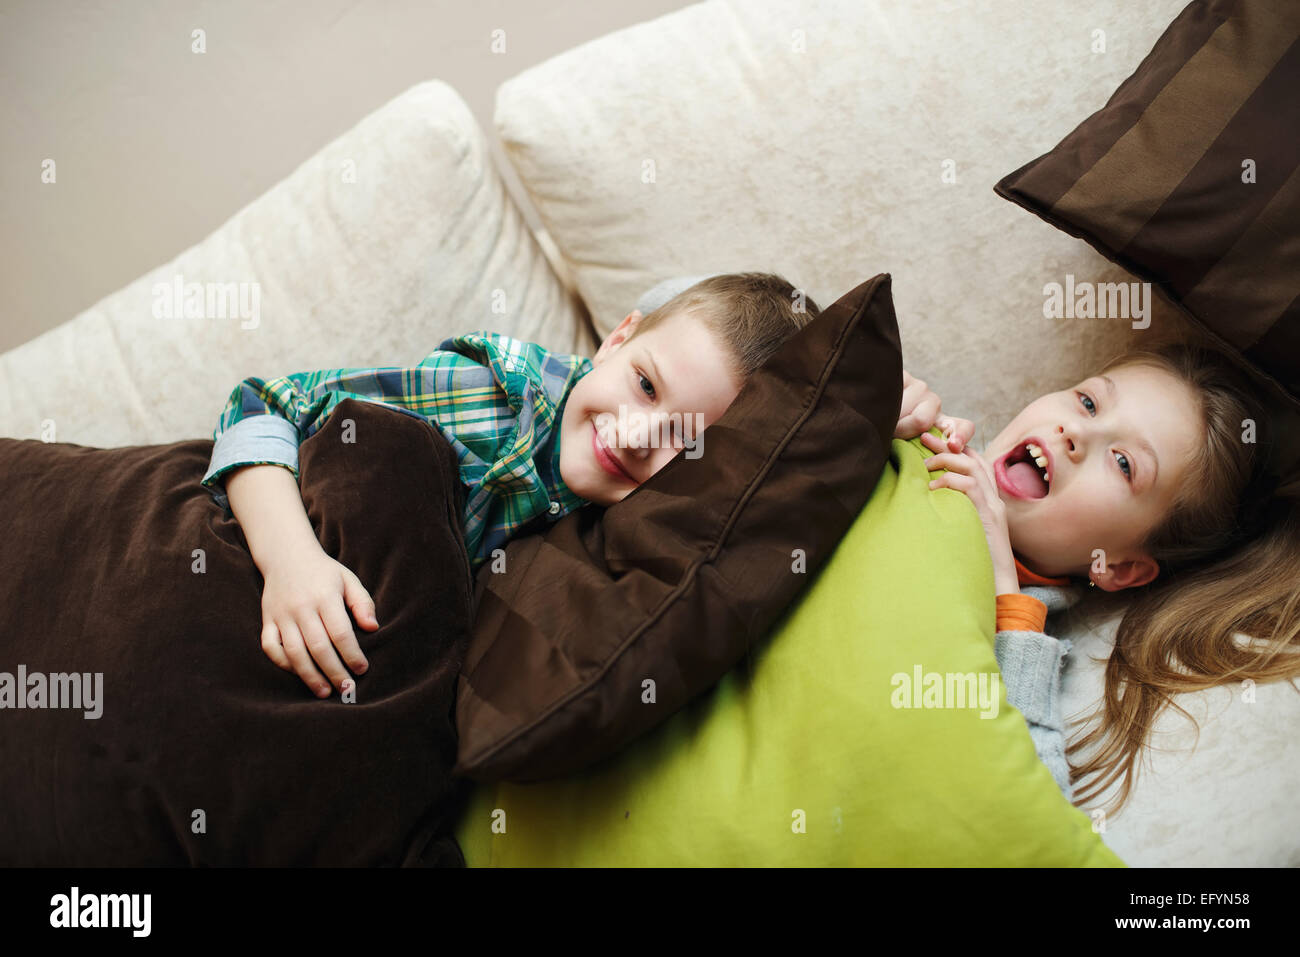 boy fights with girl pillow at home Stock Photo